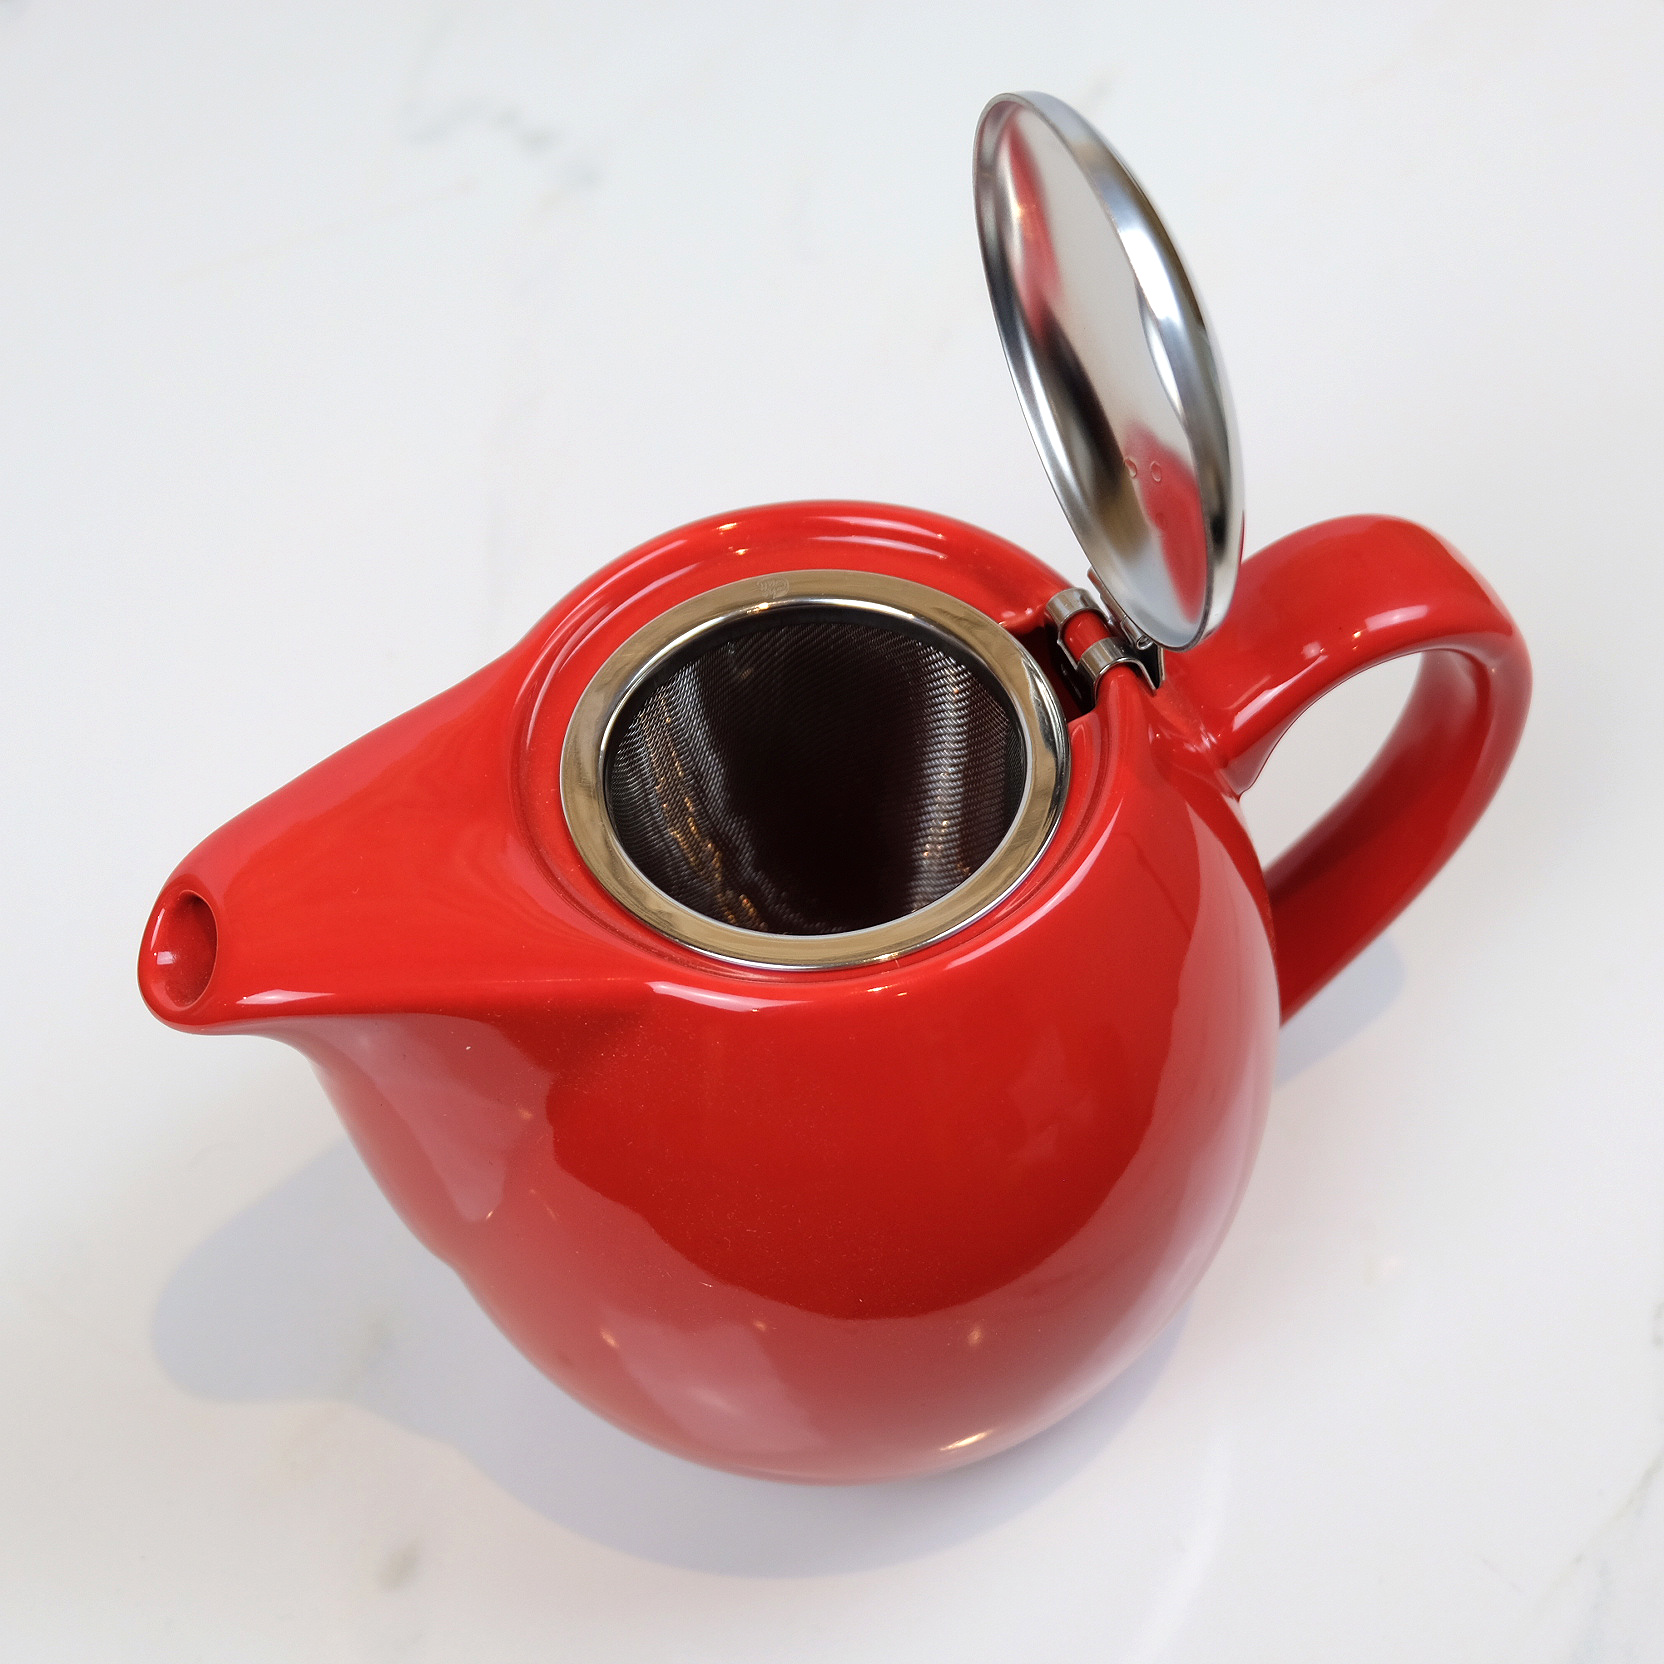 Buy Sipologie 400ml Loose Leaf Teapot with Infuser Ceramic, Red